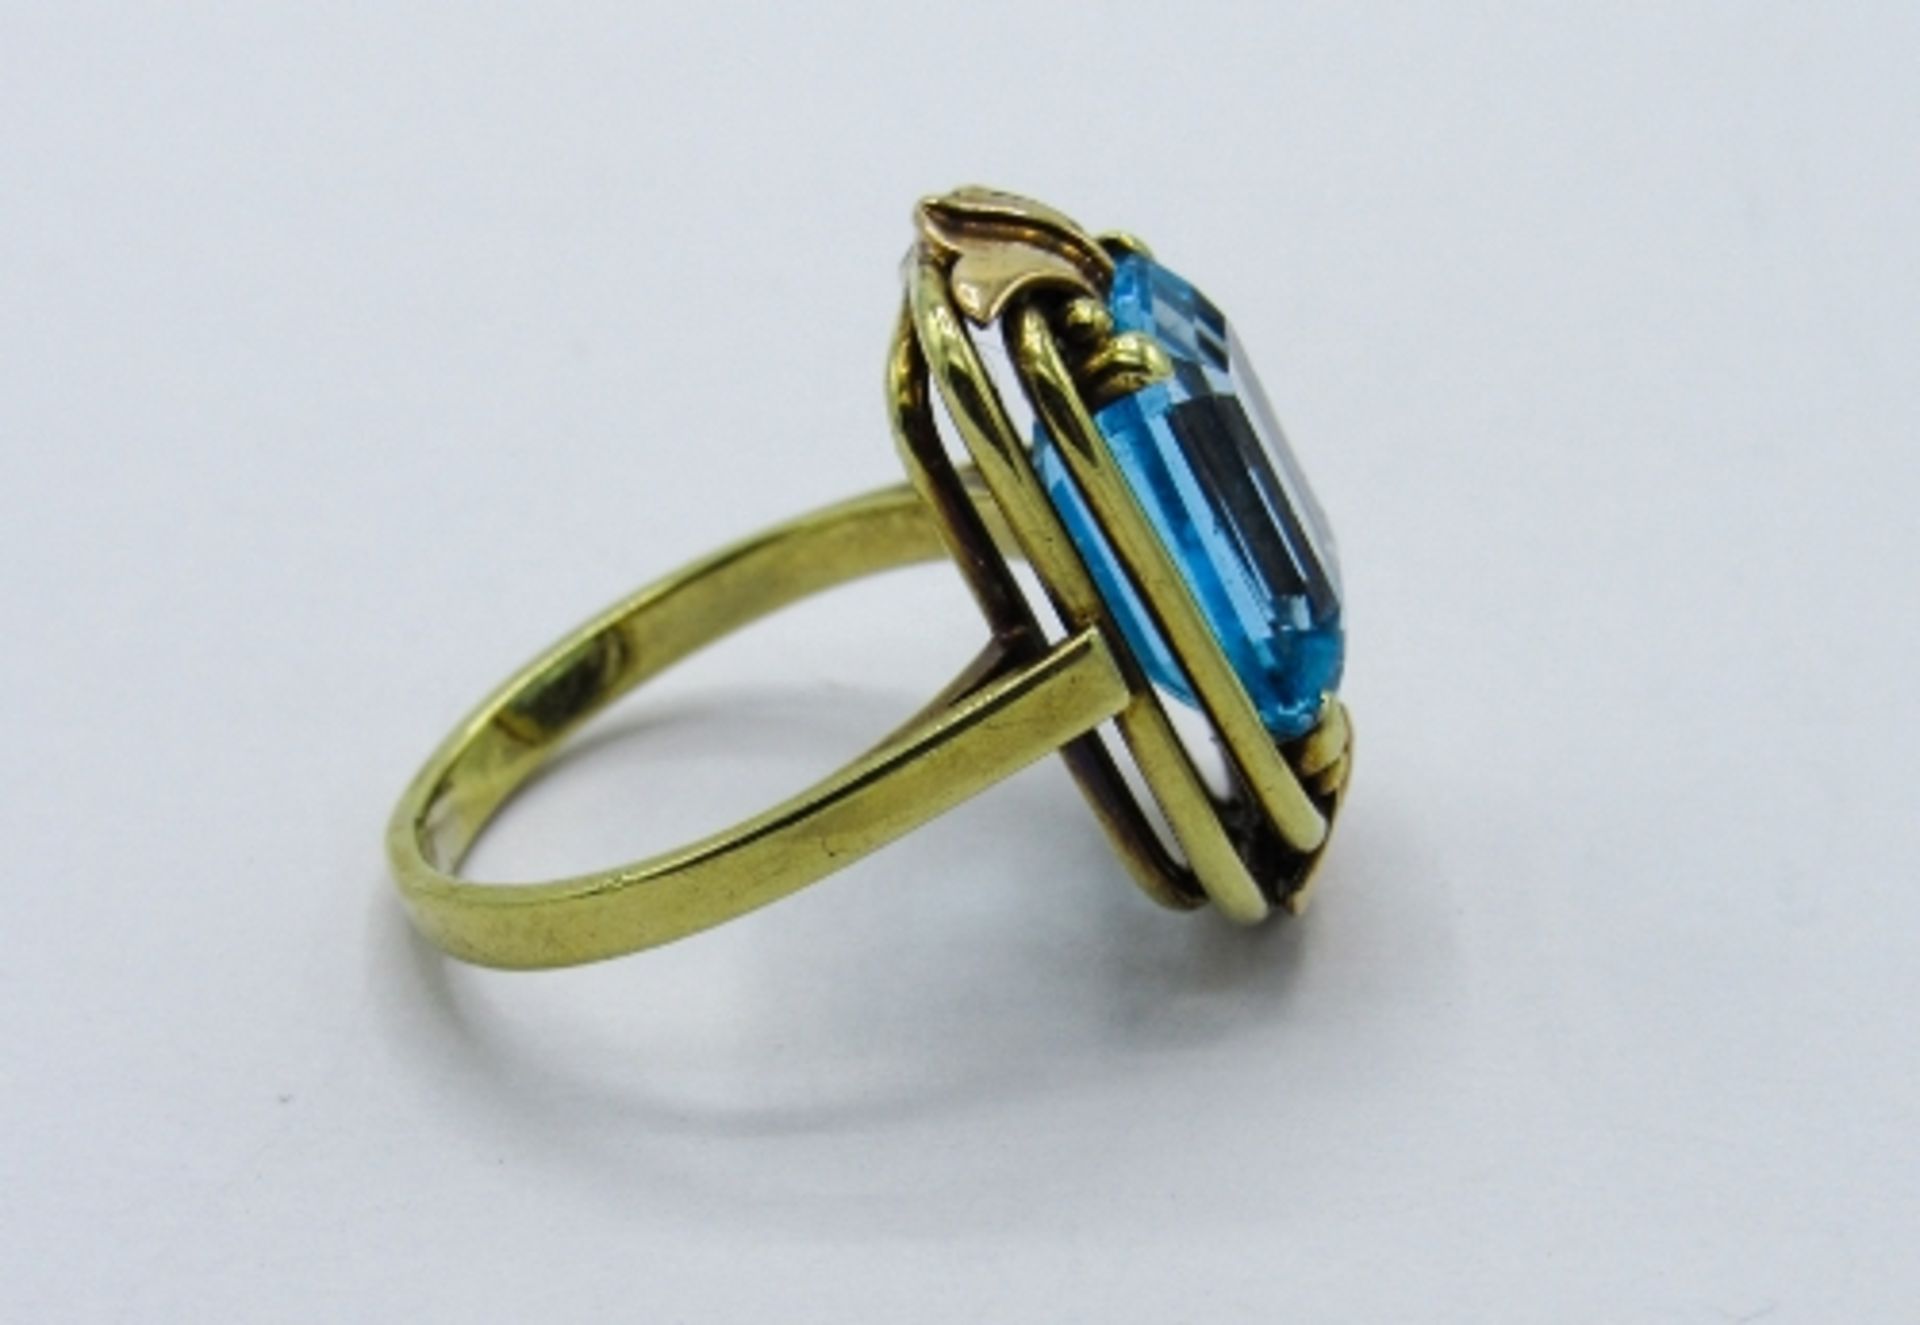 14ct gold Art Deco topaz ring, weight 6gms, size N. Estimate £275-300 - Image 2 of 5